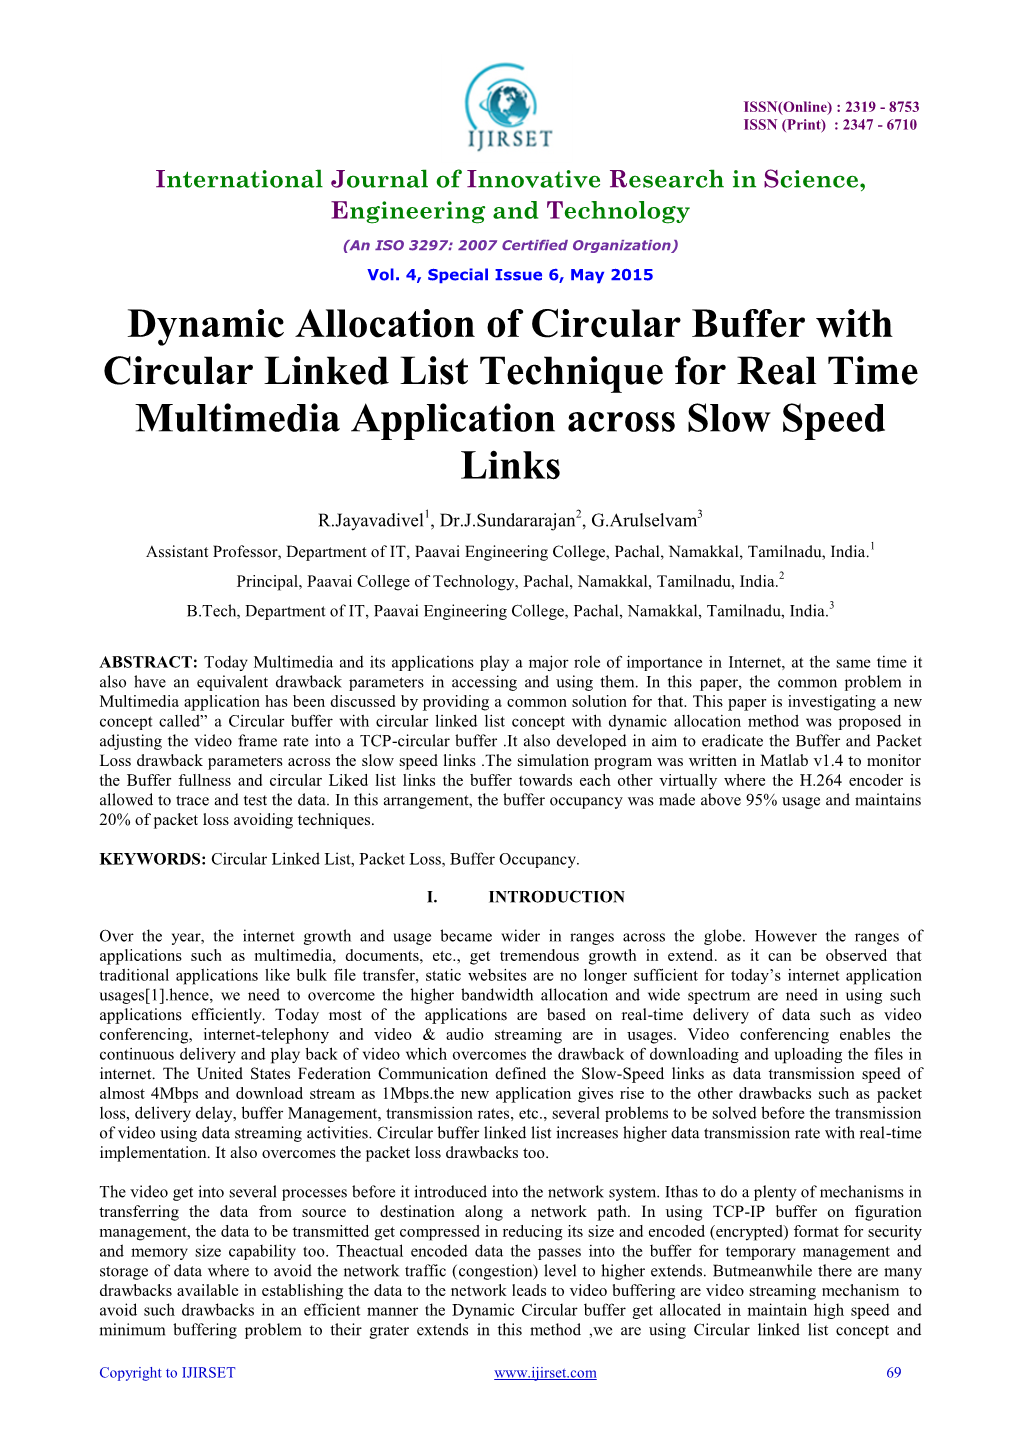 Dynamic Allocation of Circular Buffer with Circular Linked List Technique for Real Time Multimedia Application Across Slow Speed Links